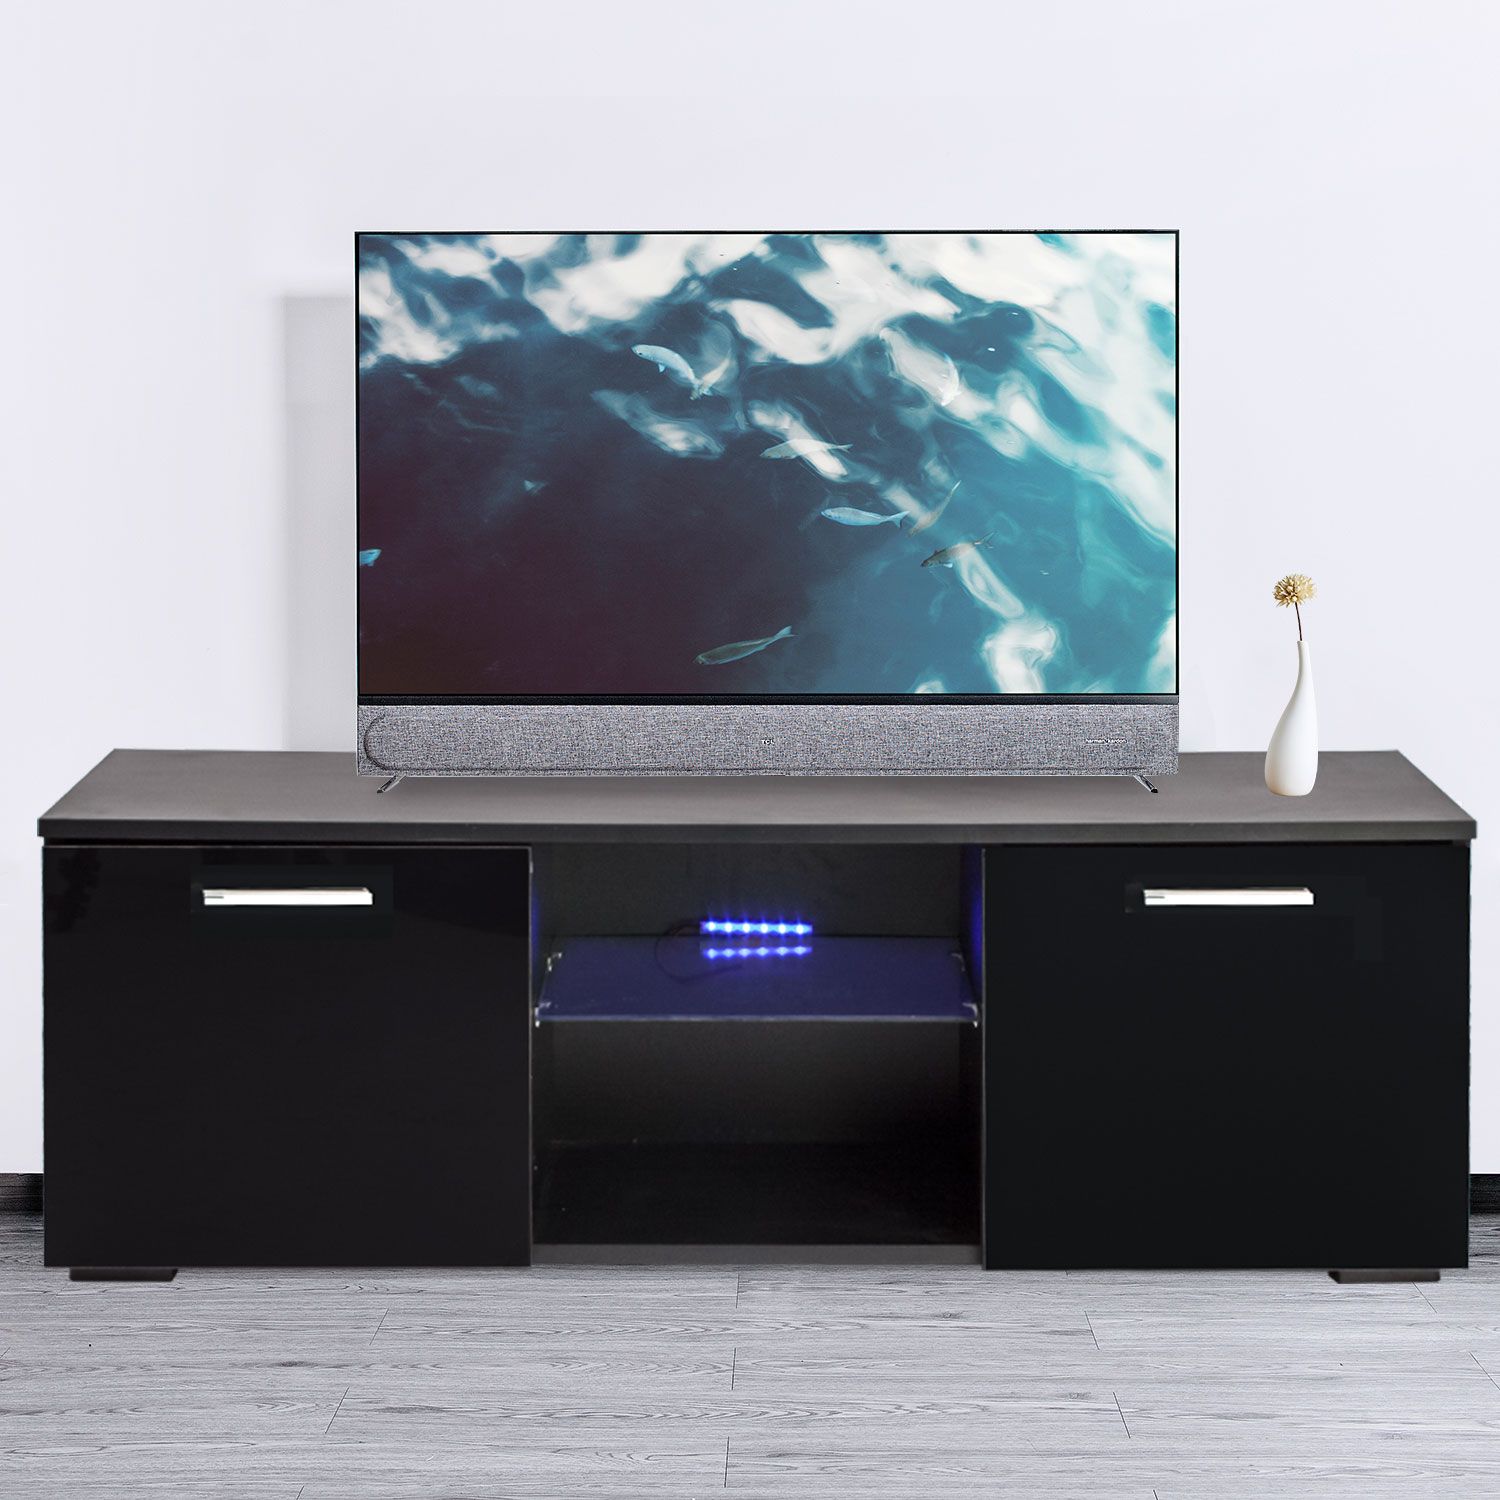 120cm Tv Cabinet Stand Unit Modern Led Light High Gloss 2 Pertaining To Ktaxon Modern High Gloss Tv Stands With Led Drawer And Shelves (View 11 of 15)